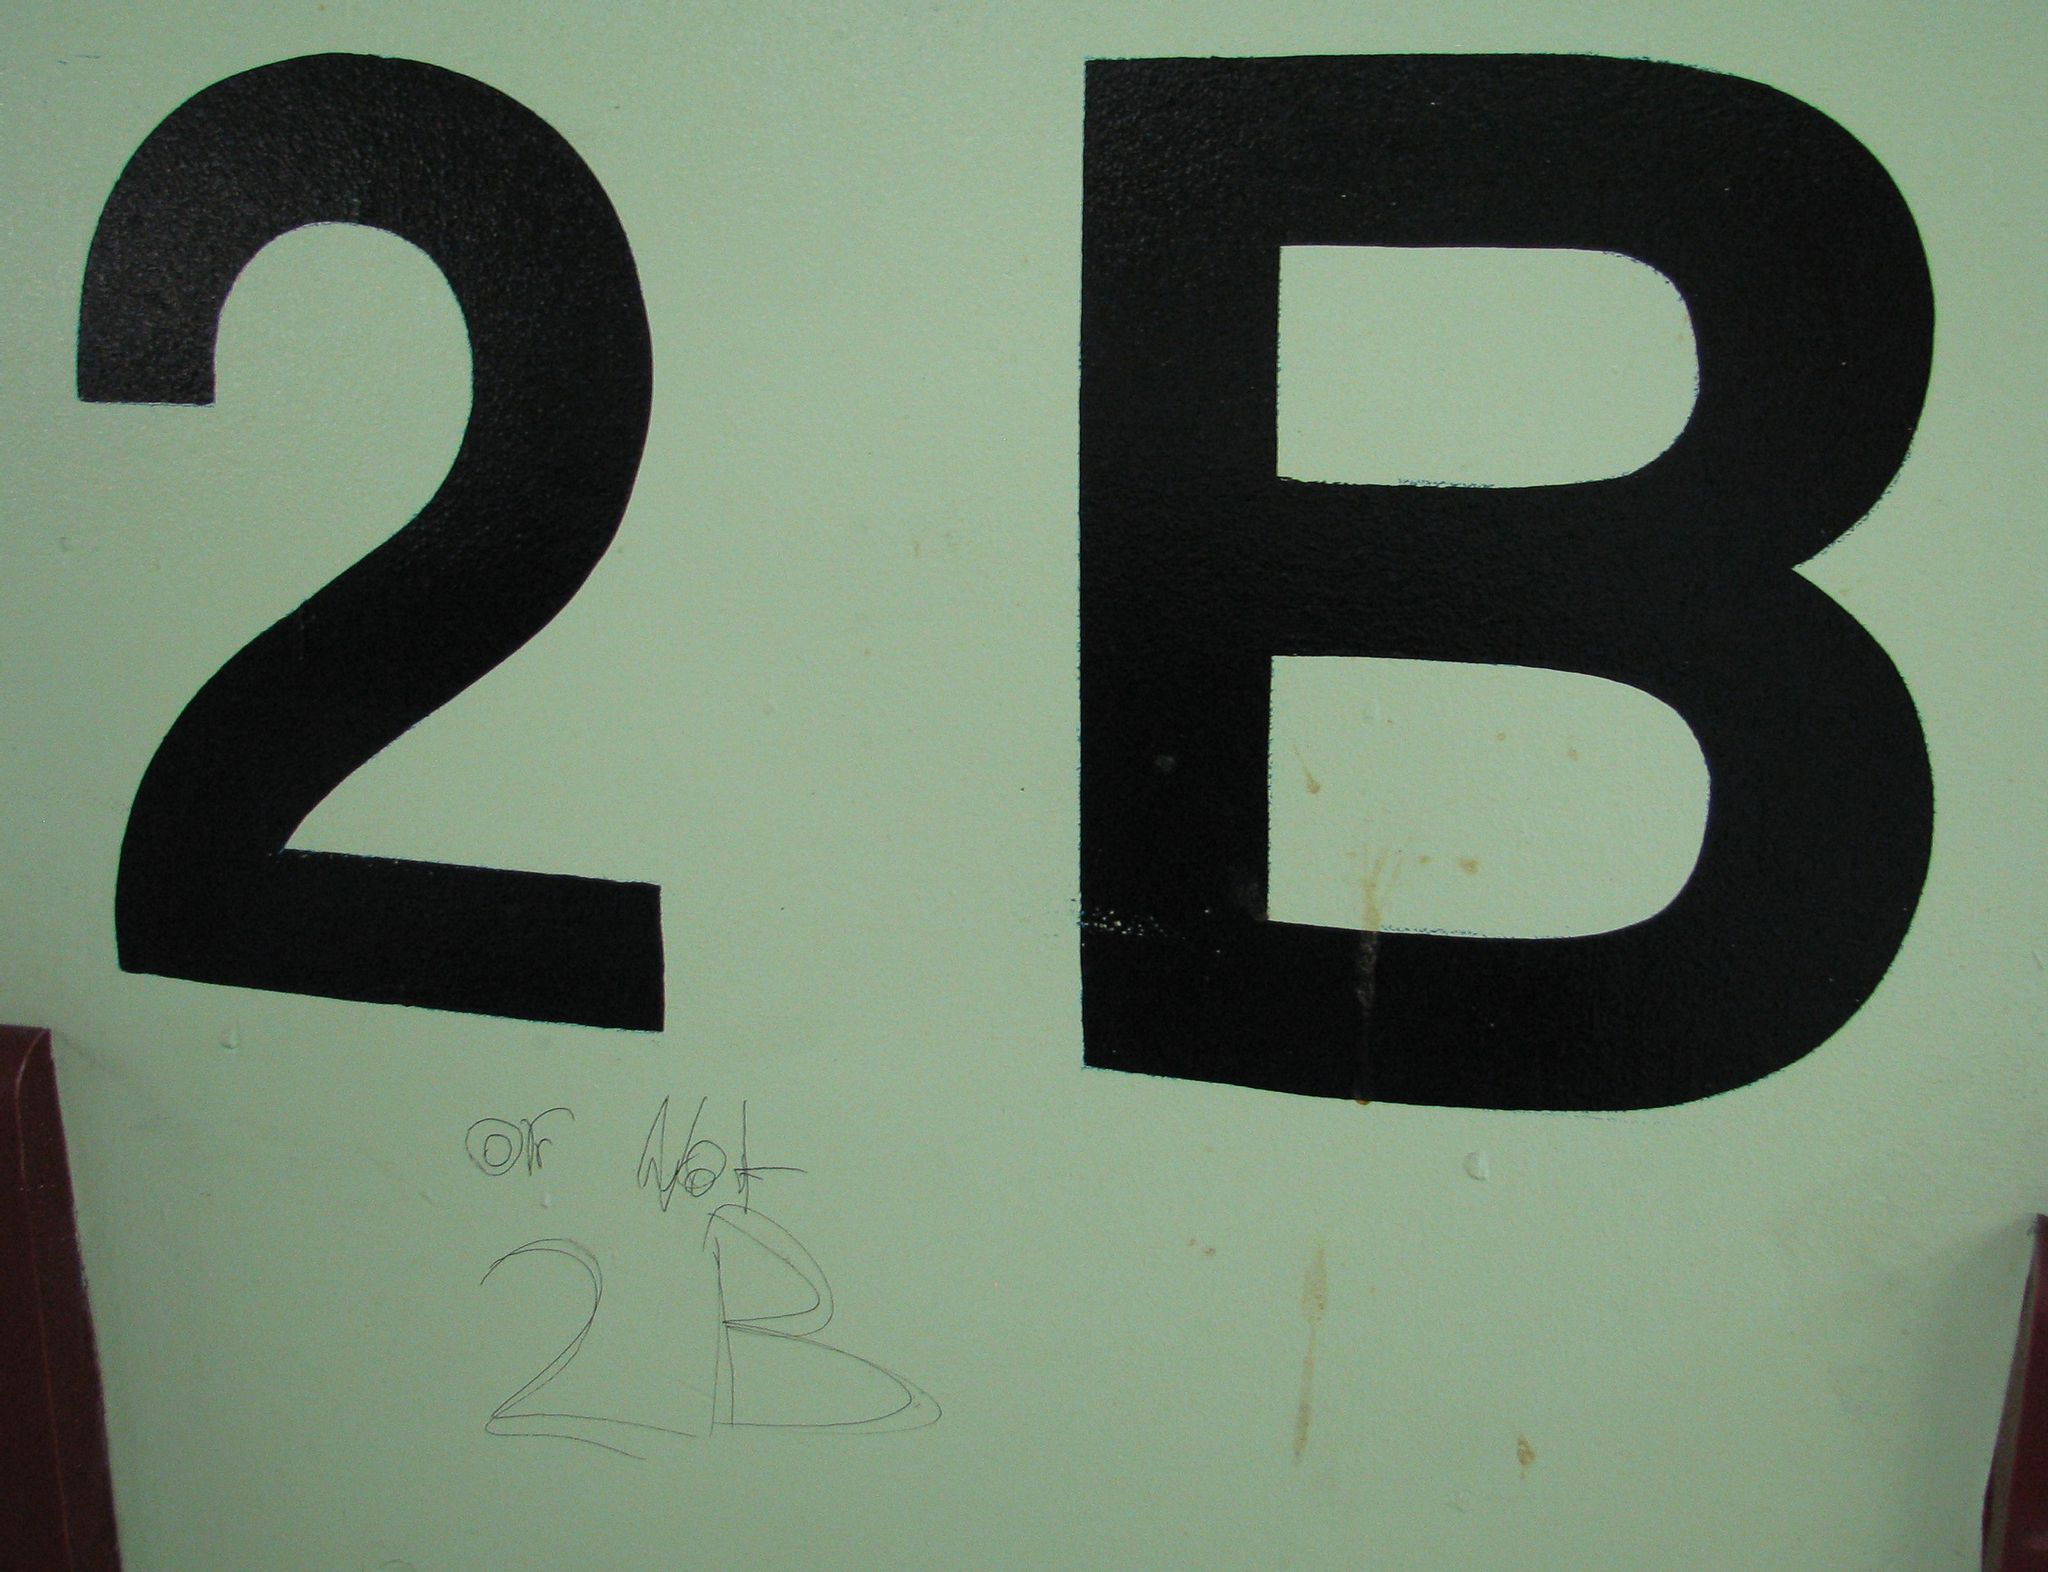 A photo of column in carpark showing the location as being "2B", and someone has scrawled underneath it "or not 2B".